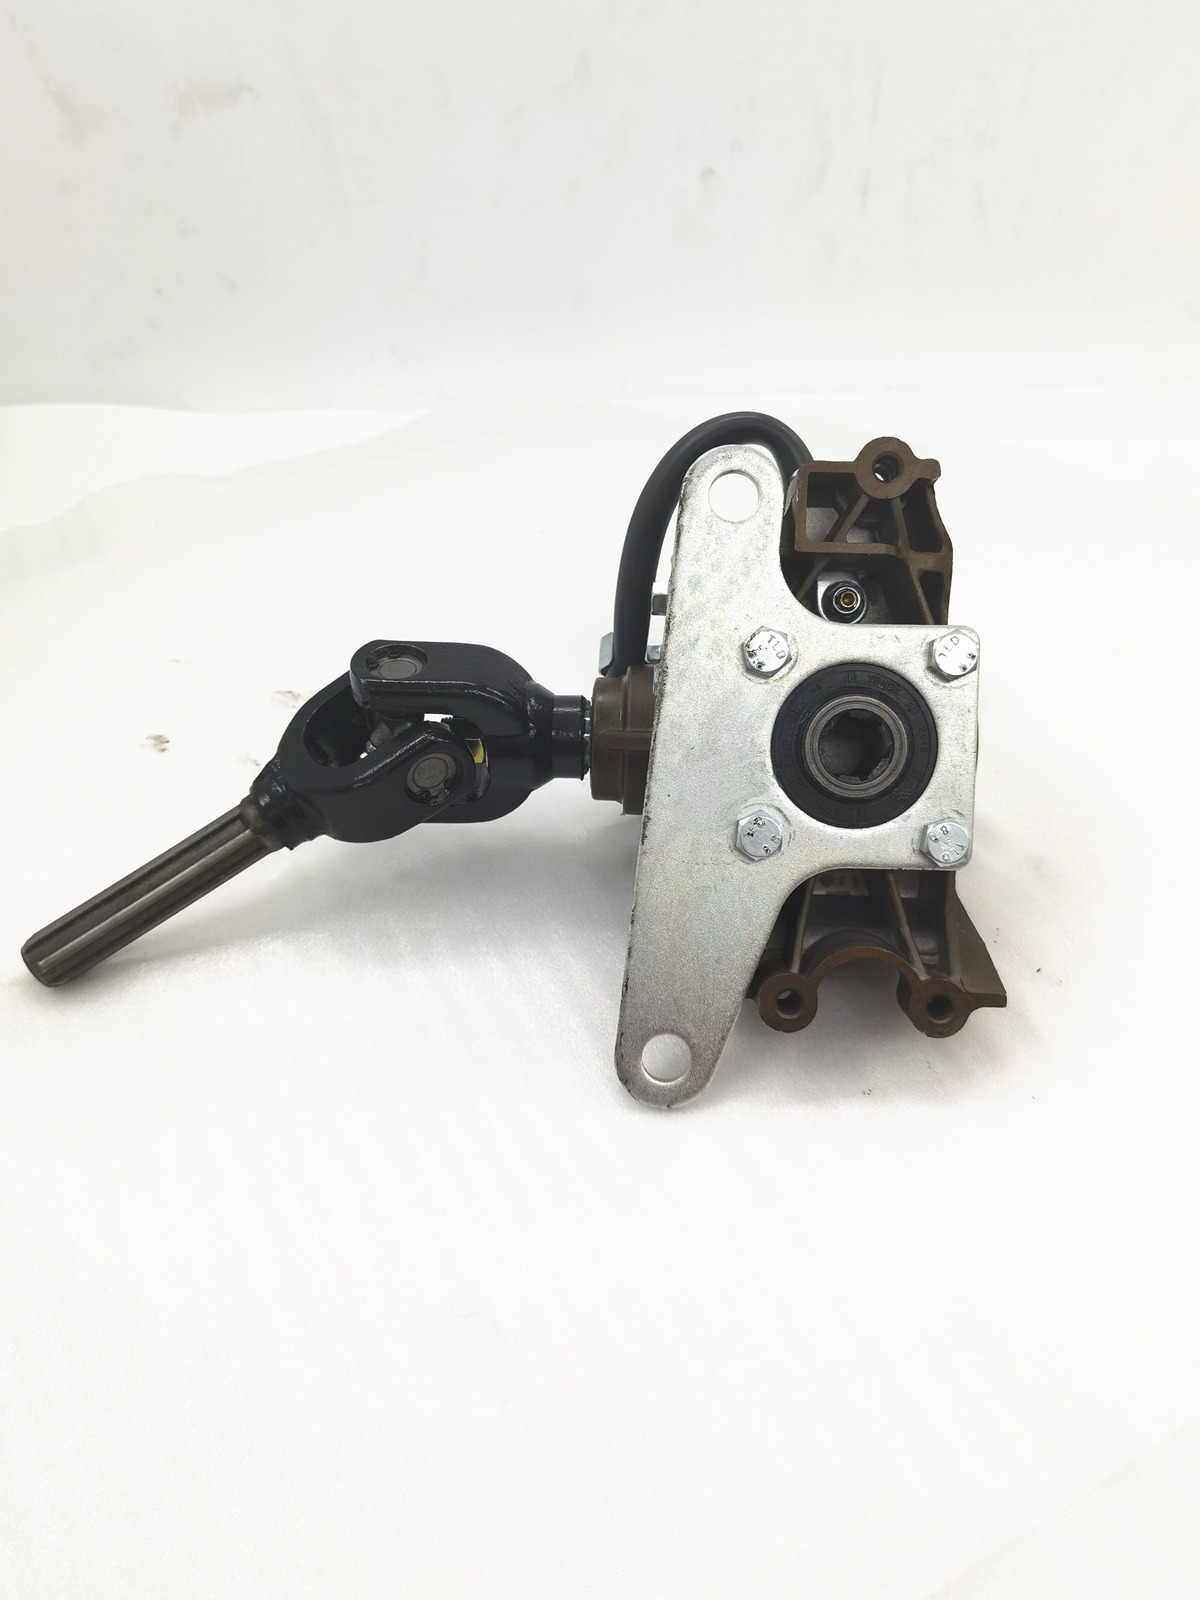 DAYANG Brand Custom Motorcycle spare parts tricycle reverse gear box for Engine Motor Trike with big size base plate